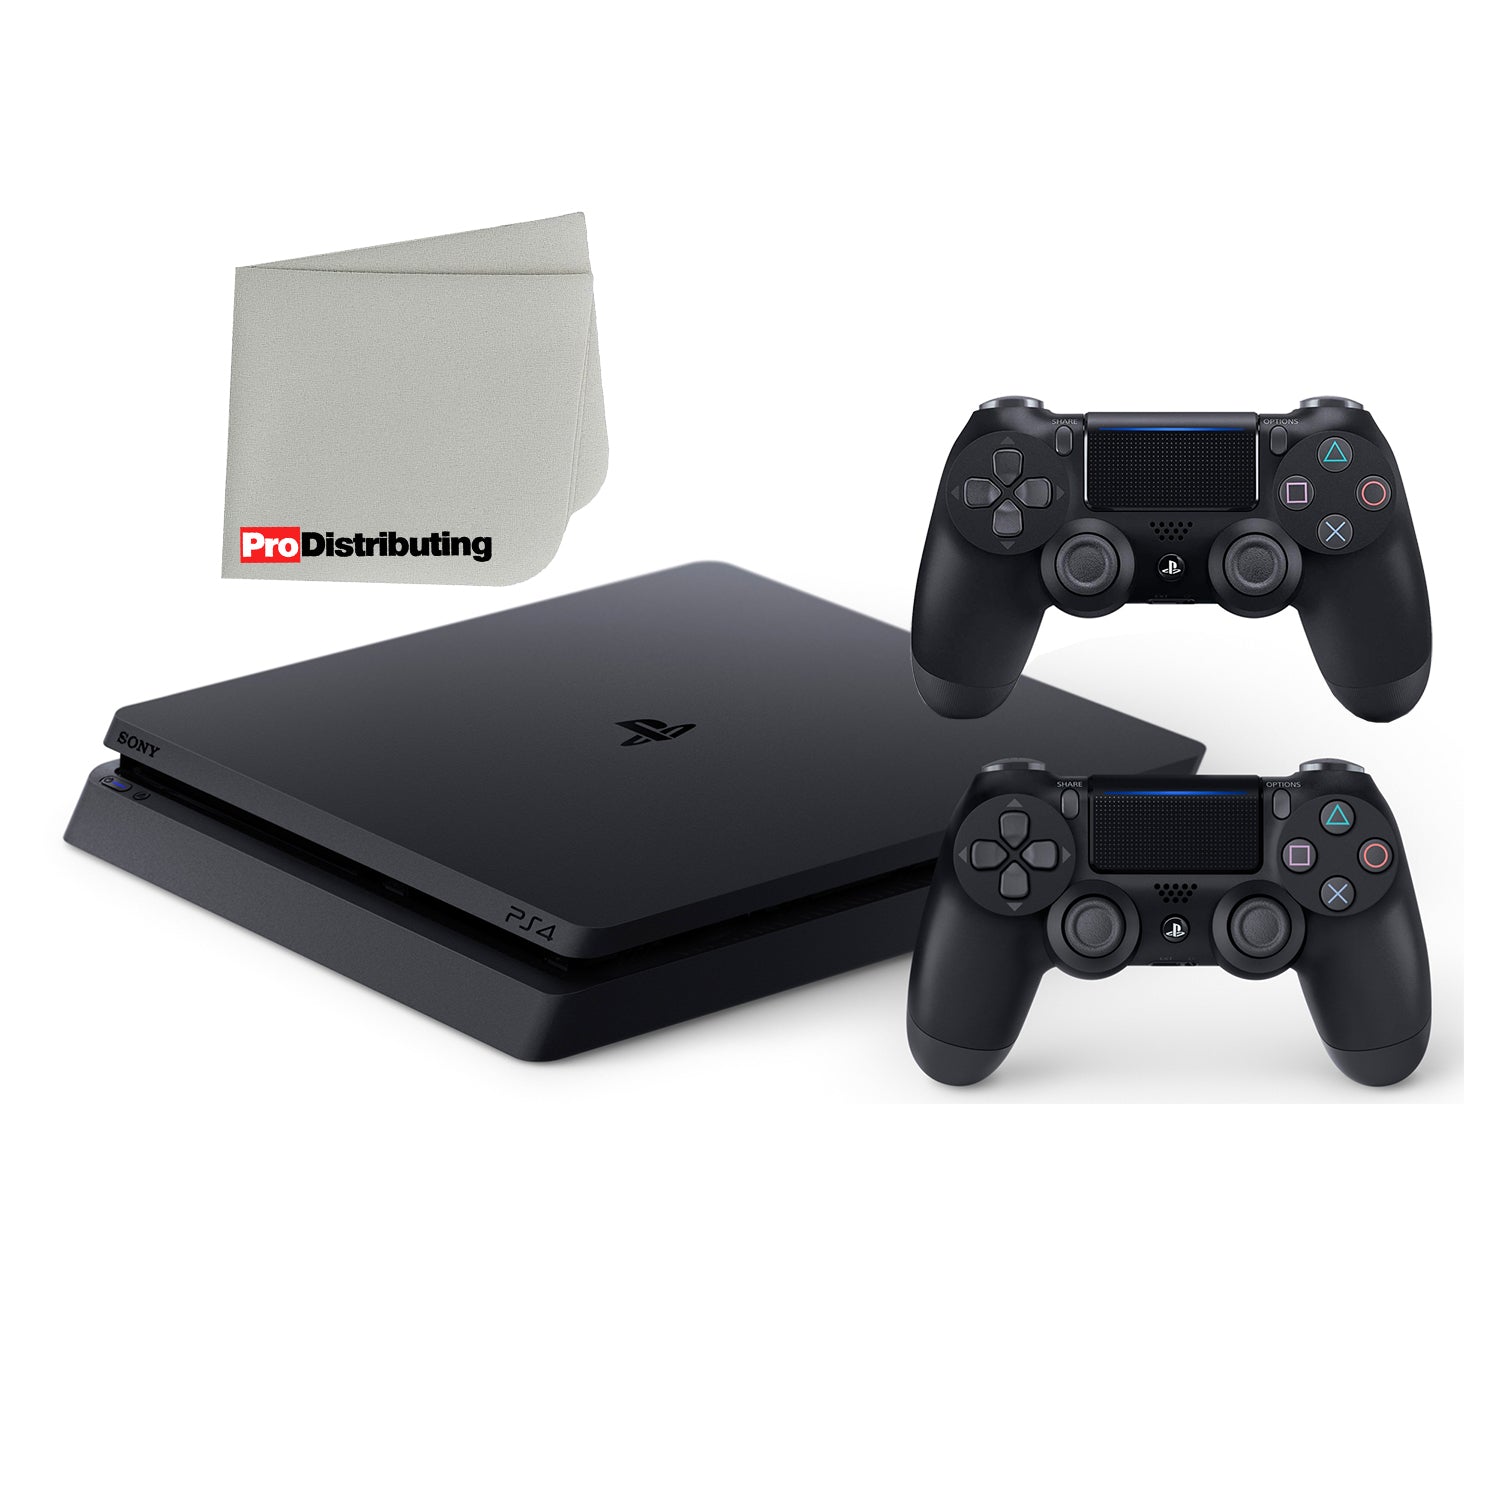 Sony PlayStation 4 Slim 1TB Video Game Console with Extra Dualshock Controller - Black - Pro-Distributing